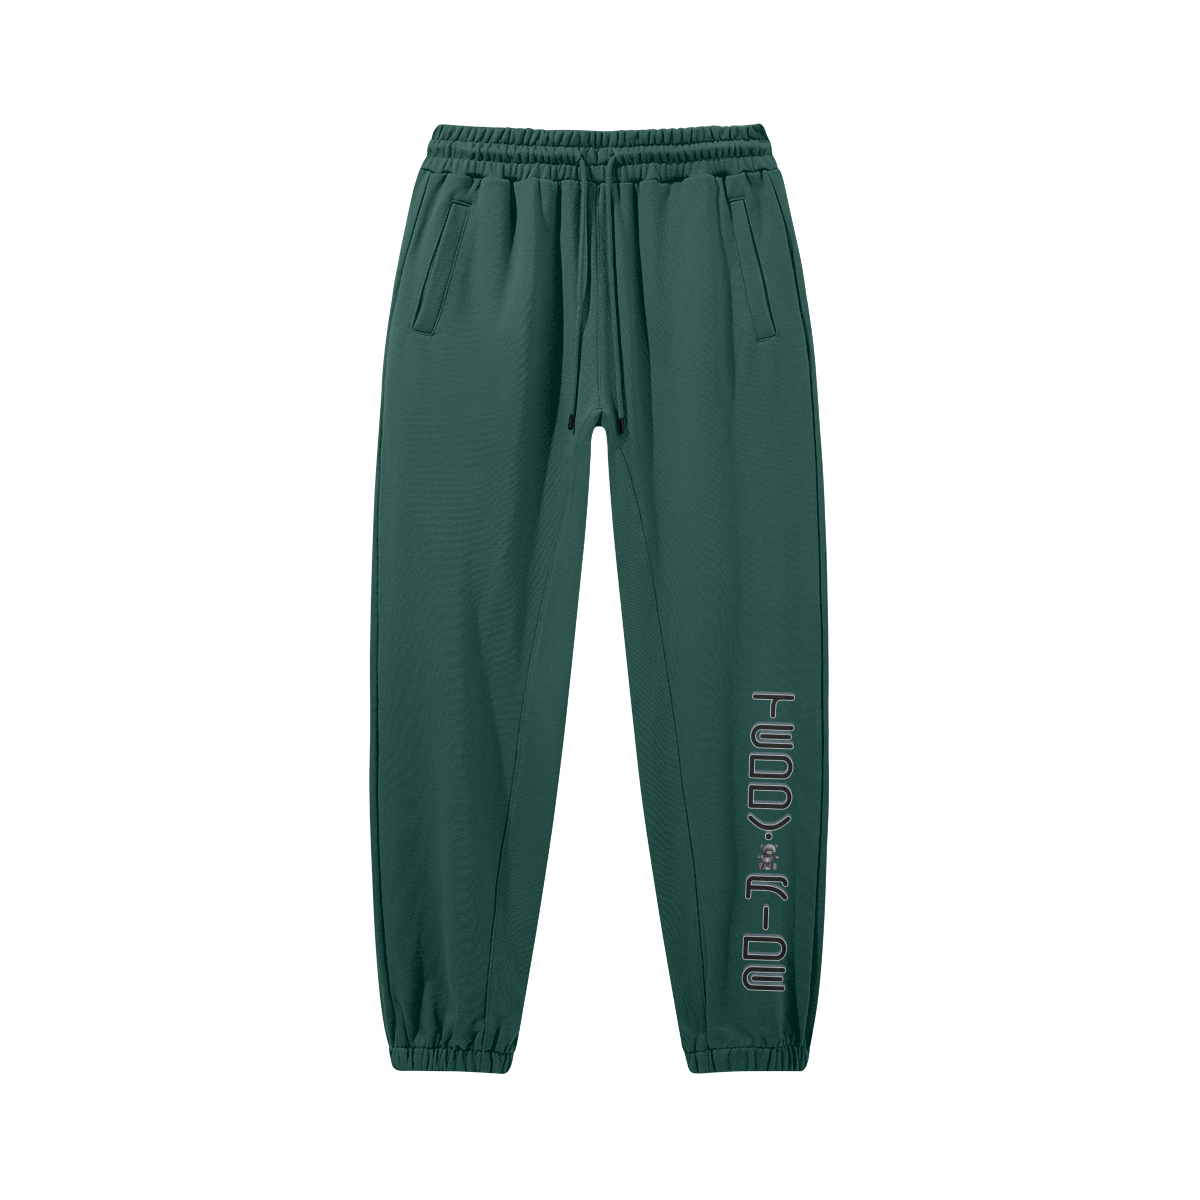 Mineral Green - Teddy Ride 380GSM Unisex Heavyweight Baggy Sweatpants - unisex sweatpants at TFC&H Co.